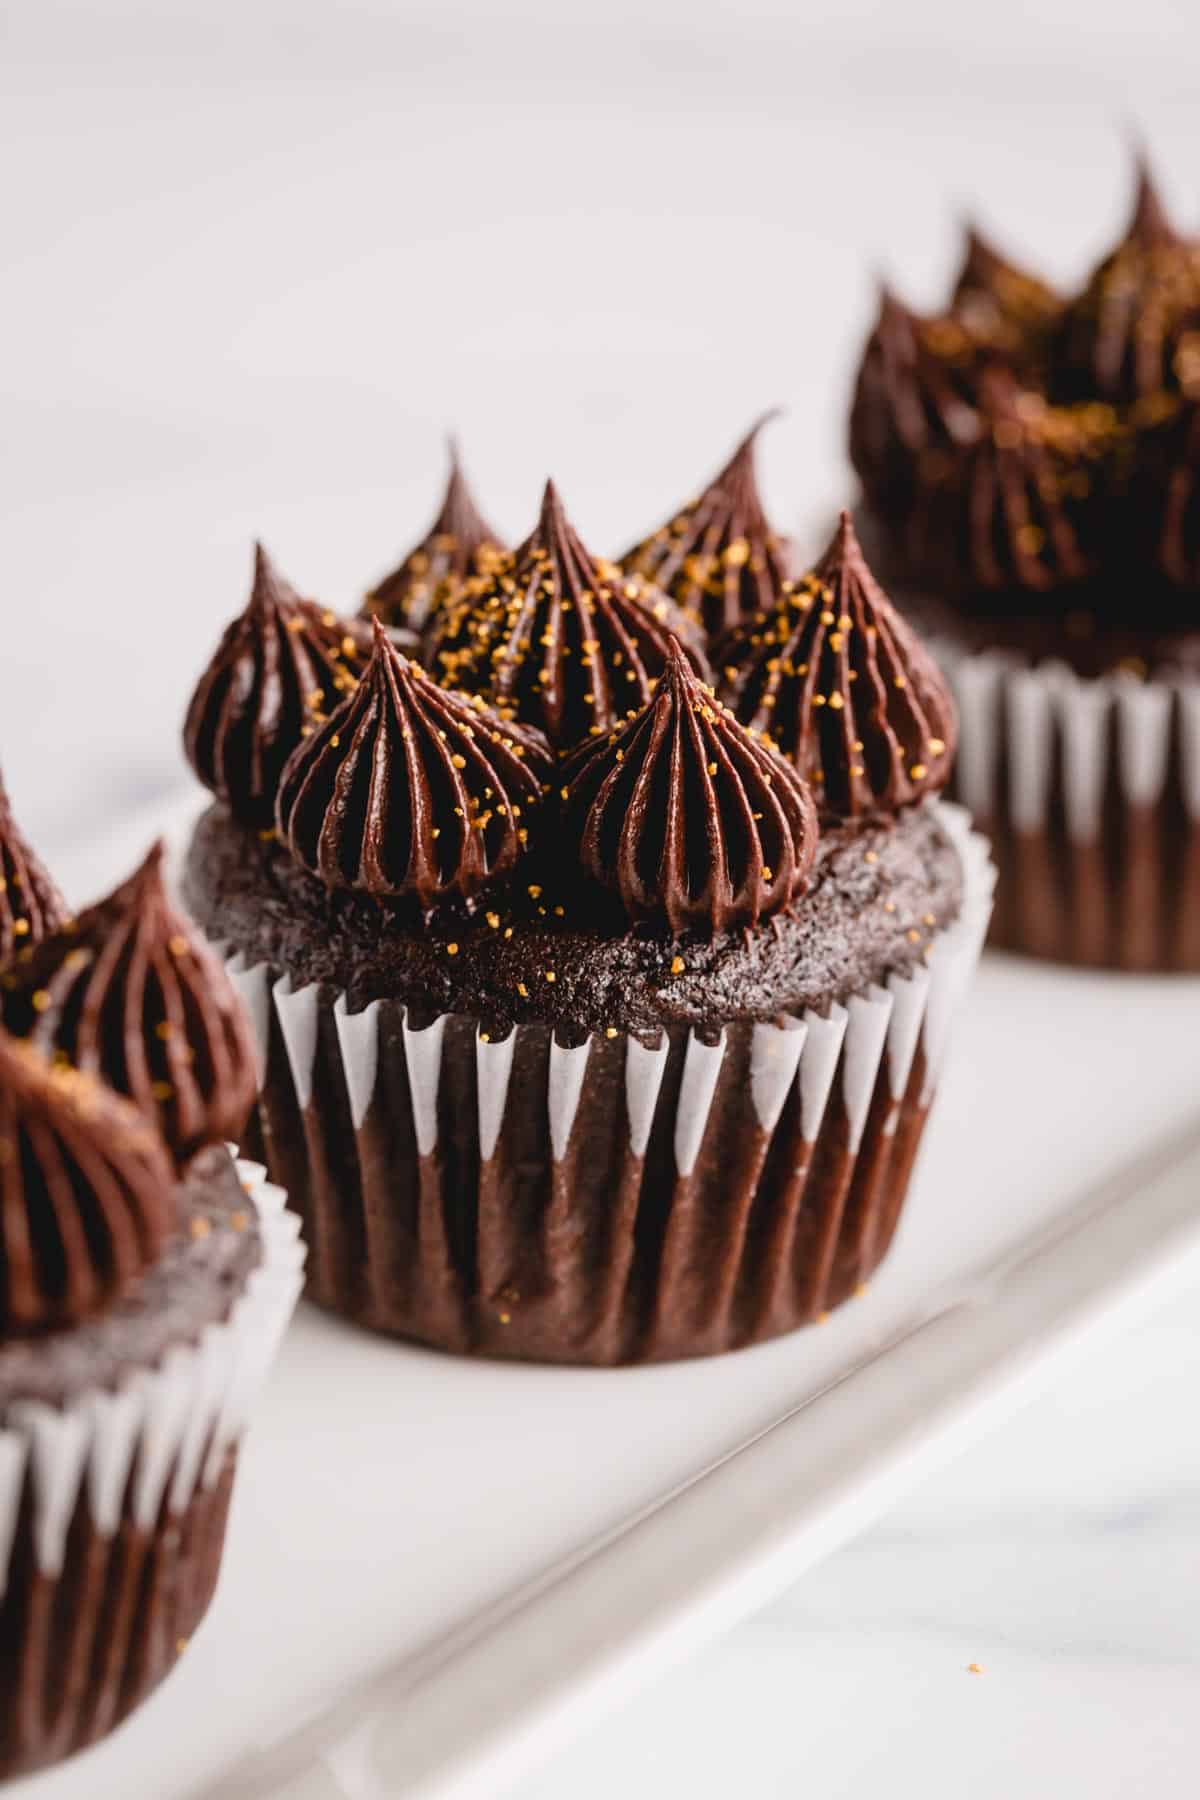 Three ultimate chocolate cupcakes topped with piped dollops of chocolate buttercream frosting.